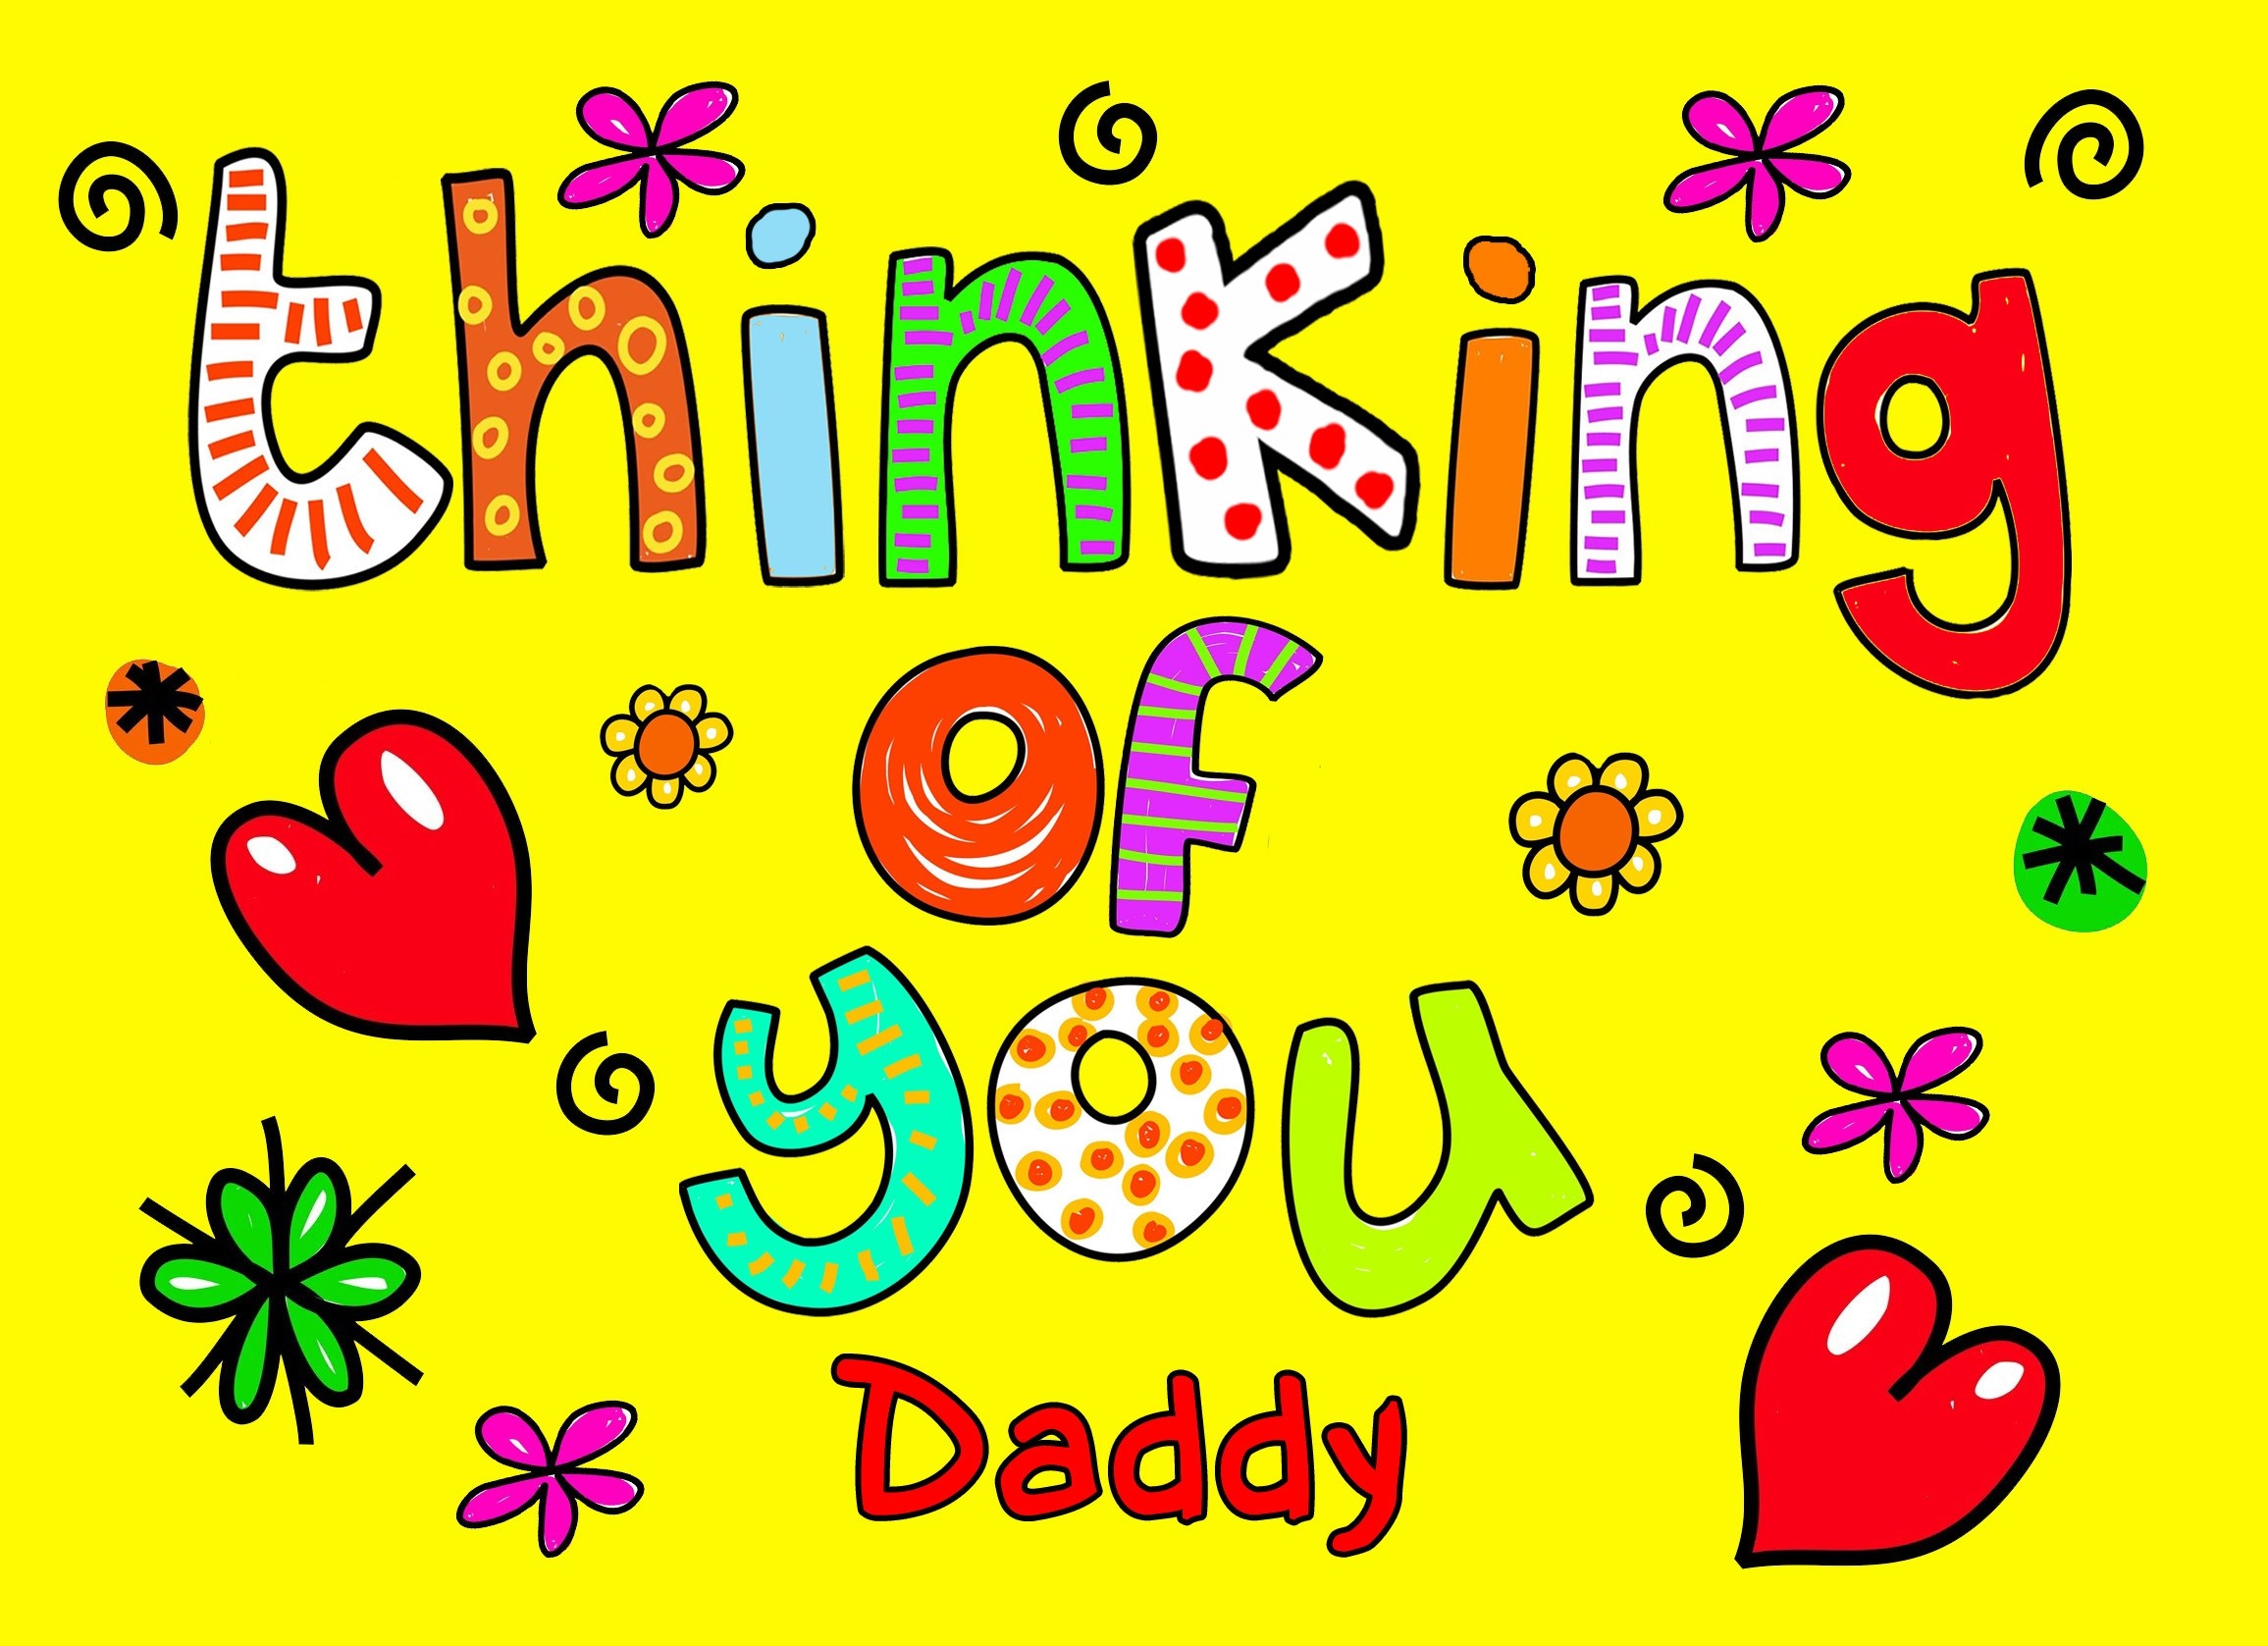 Thinking of You 'Daddy' Greeting Card